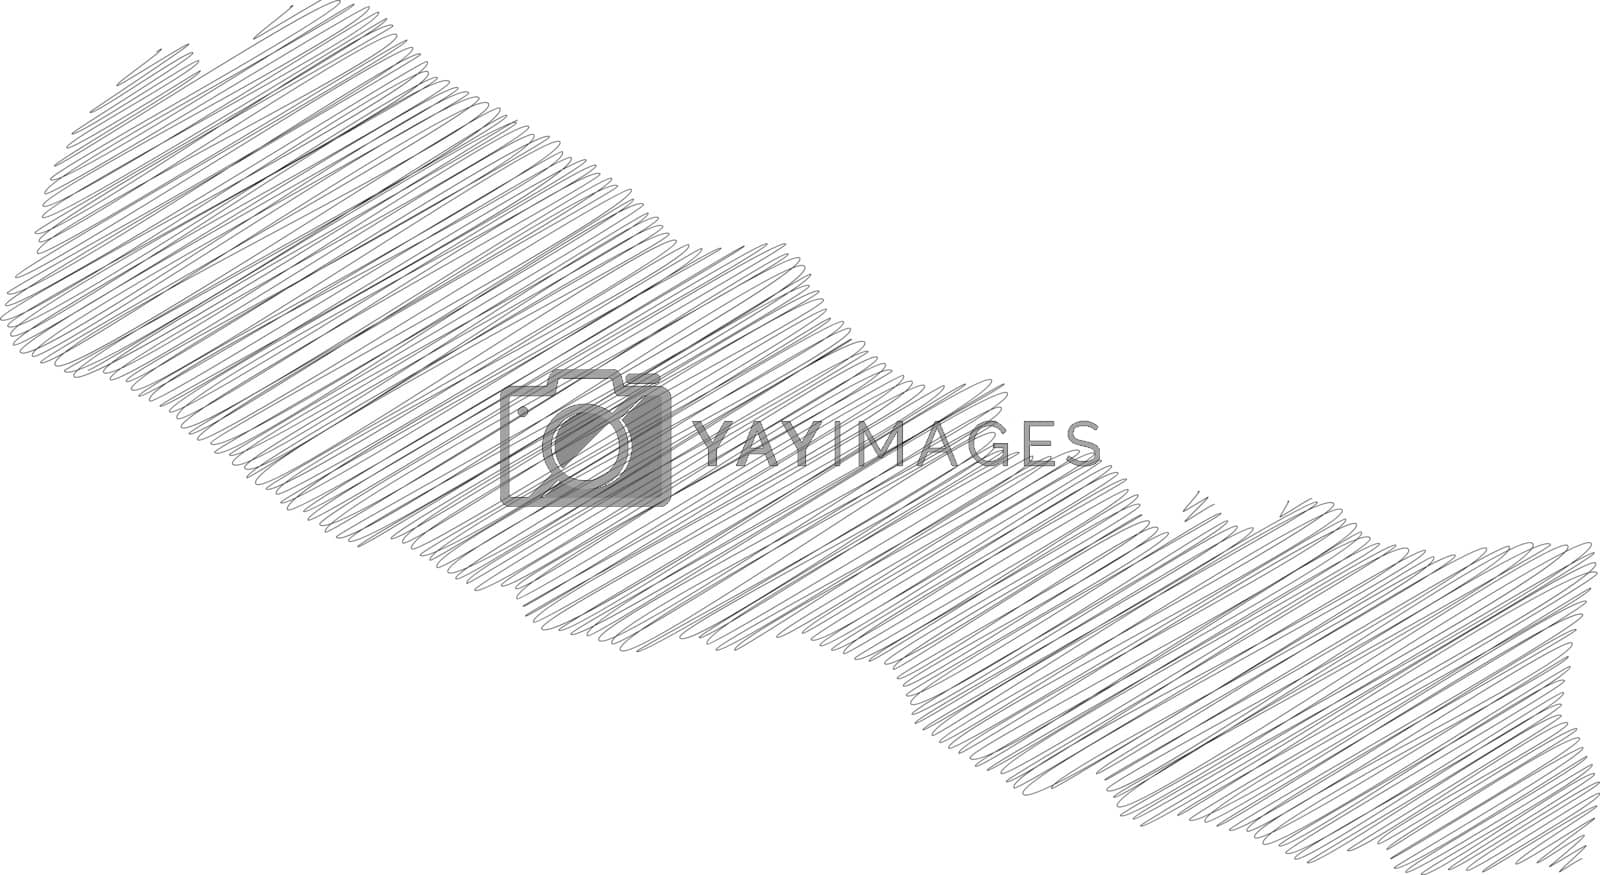 Royalty free image of Nepal - pencil scribble sketch silhouette map of country area with dropped shadow. Simple flat vector illustration by pyty